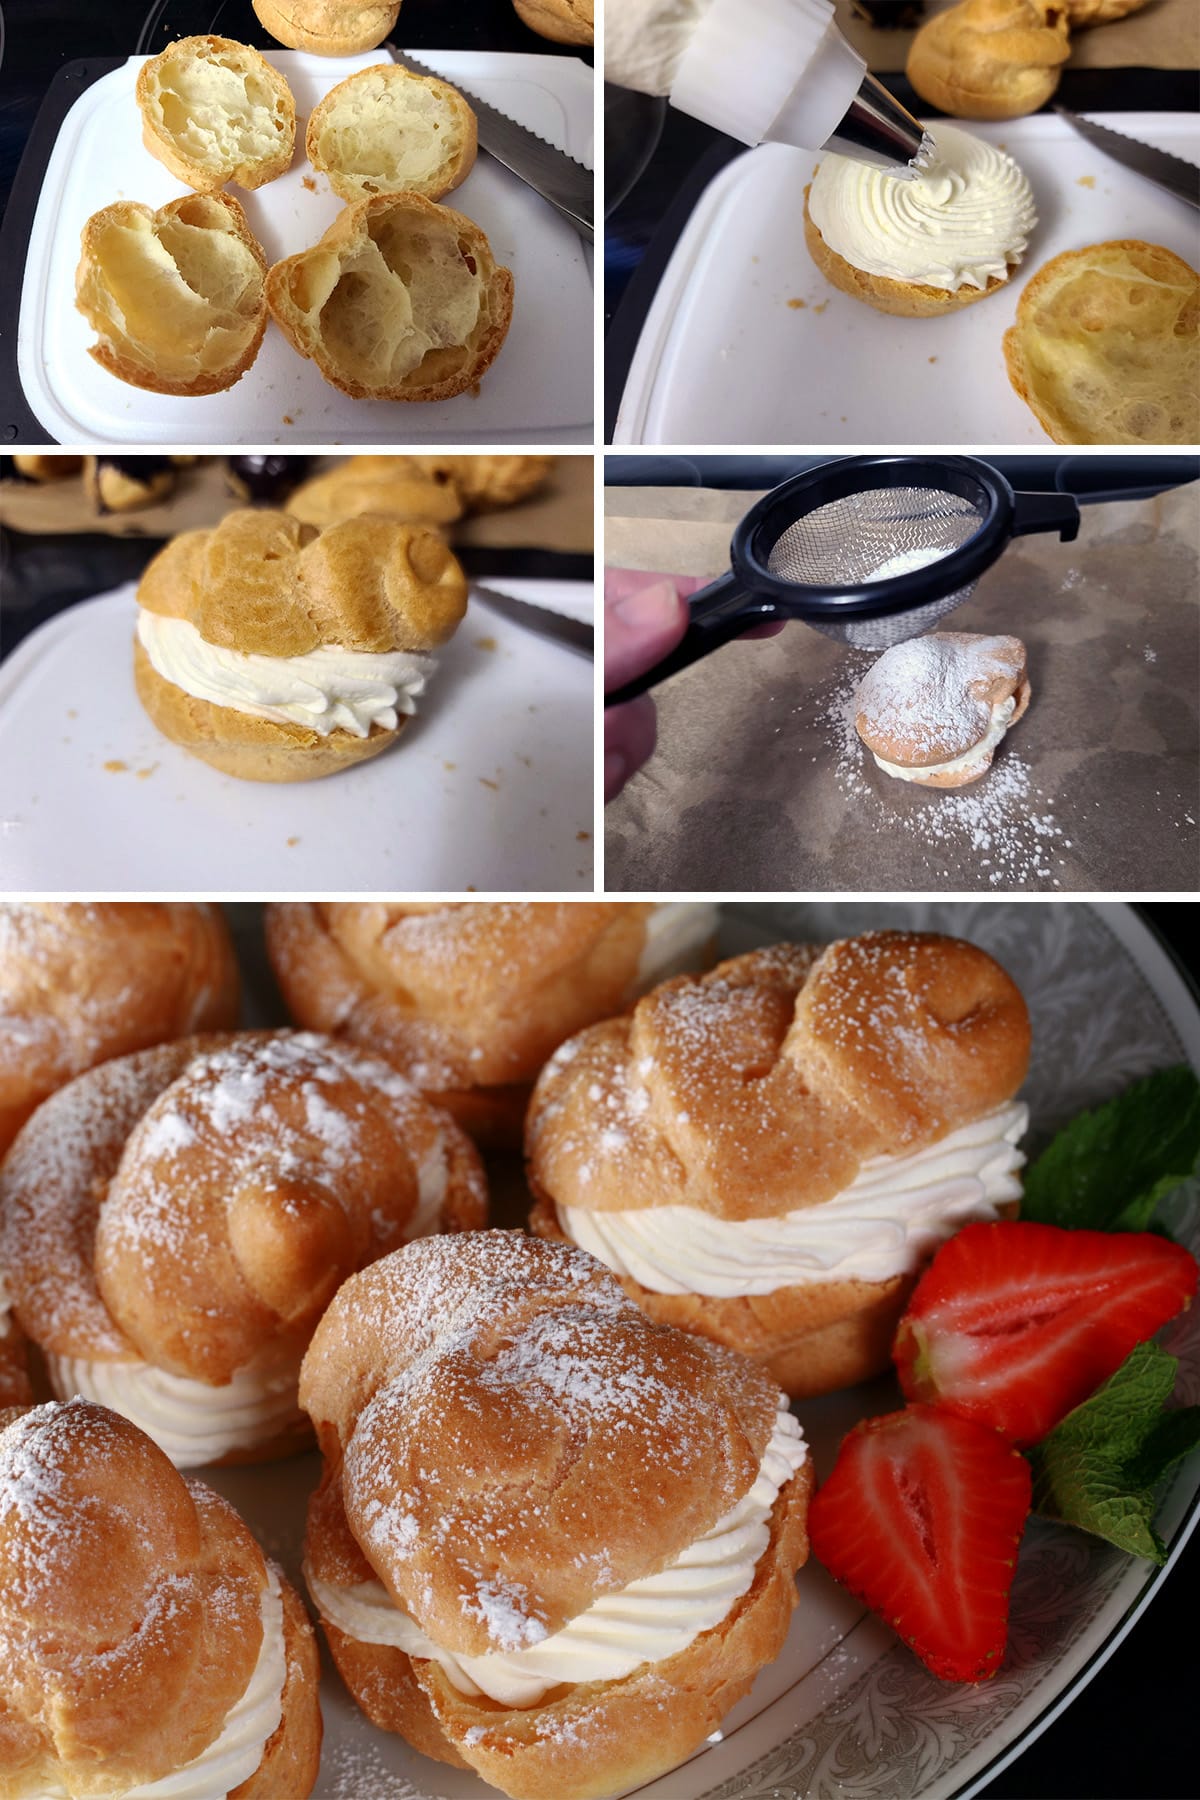 A 5 part image showing the choux pastry being cut, filled, and dusted with powdered sugar.